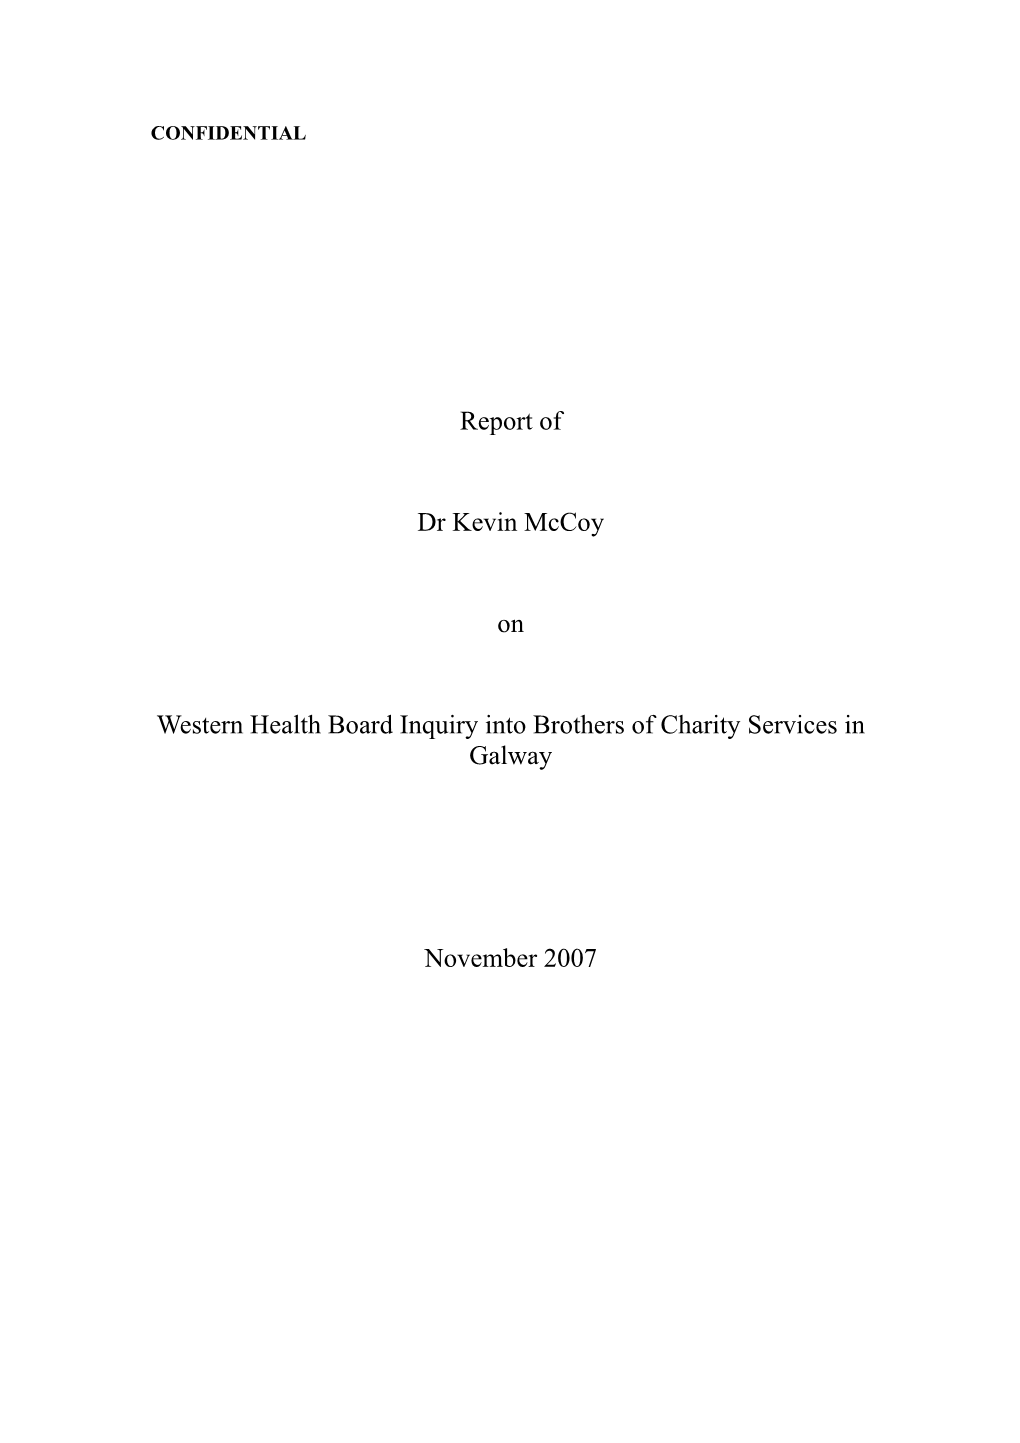 Report of Dr Kevin Mccoy on Western Health Board Inquiry Into Brothers